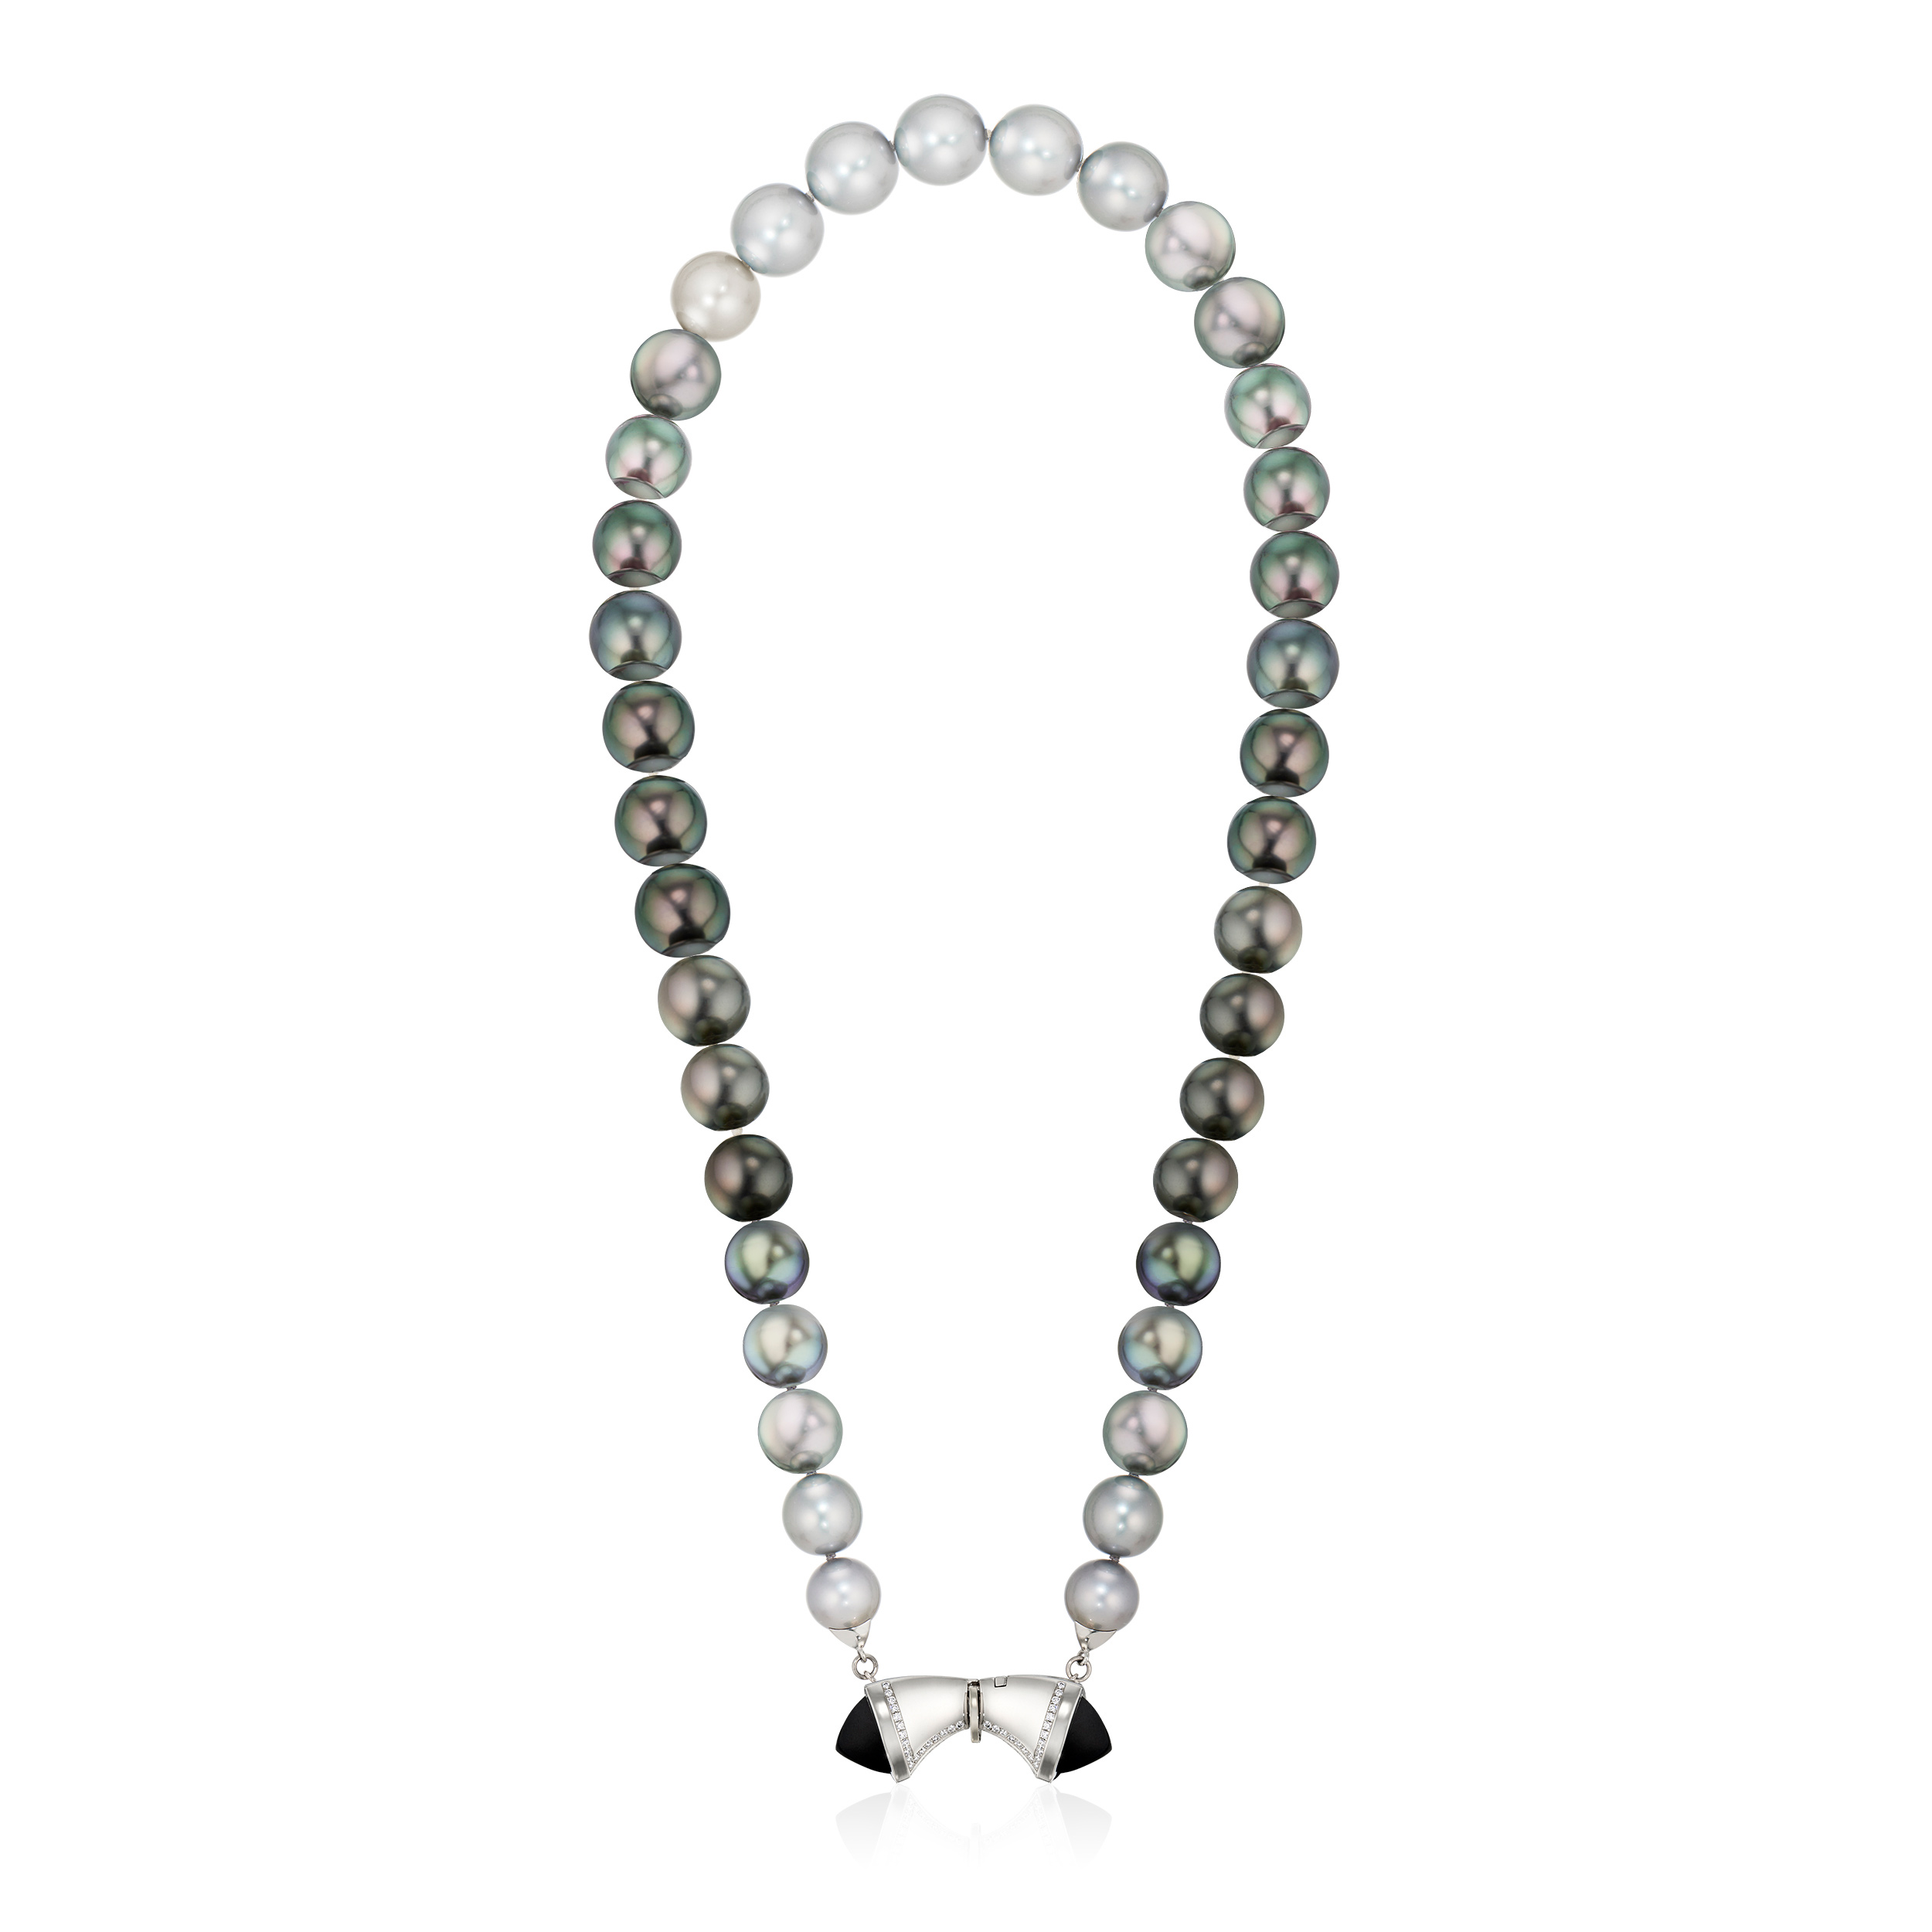 This is the Pearl Necklace With Temple Bow Clasp by Sardwell from Renisis. It features ombré Tahitian pearl necklace and 18K white gold clasp with black jade and pavé diamonds patterns